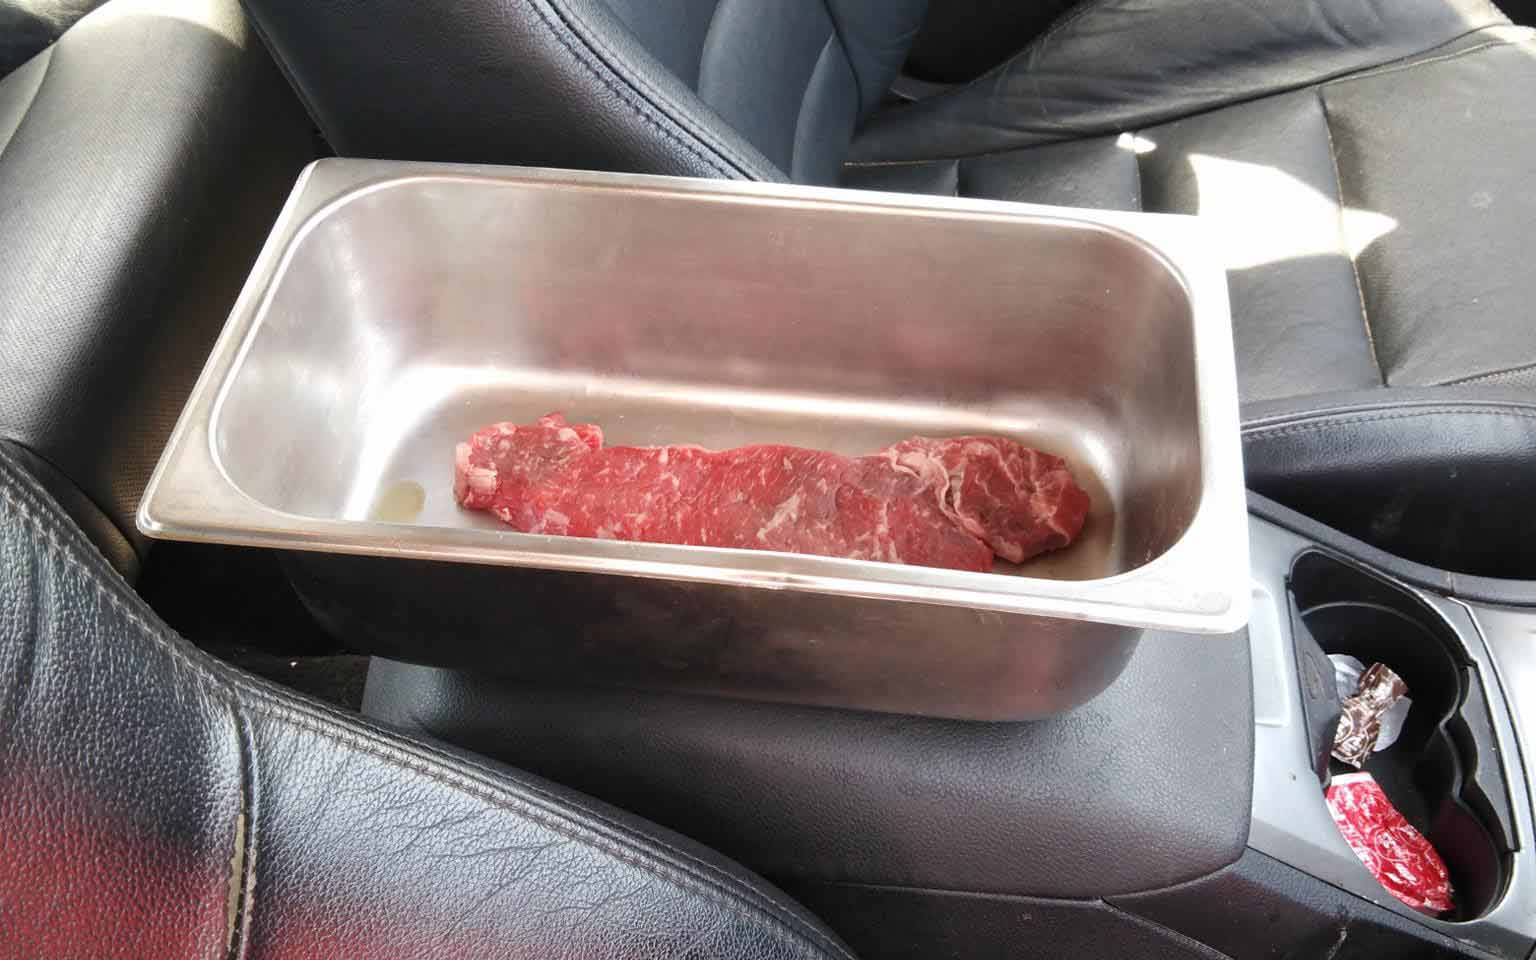 Raw steak left in car cooks to well-done